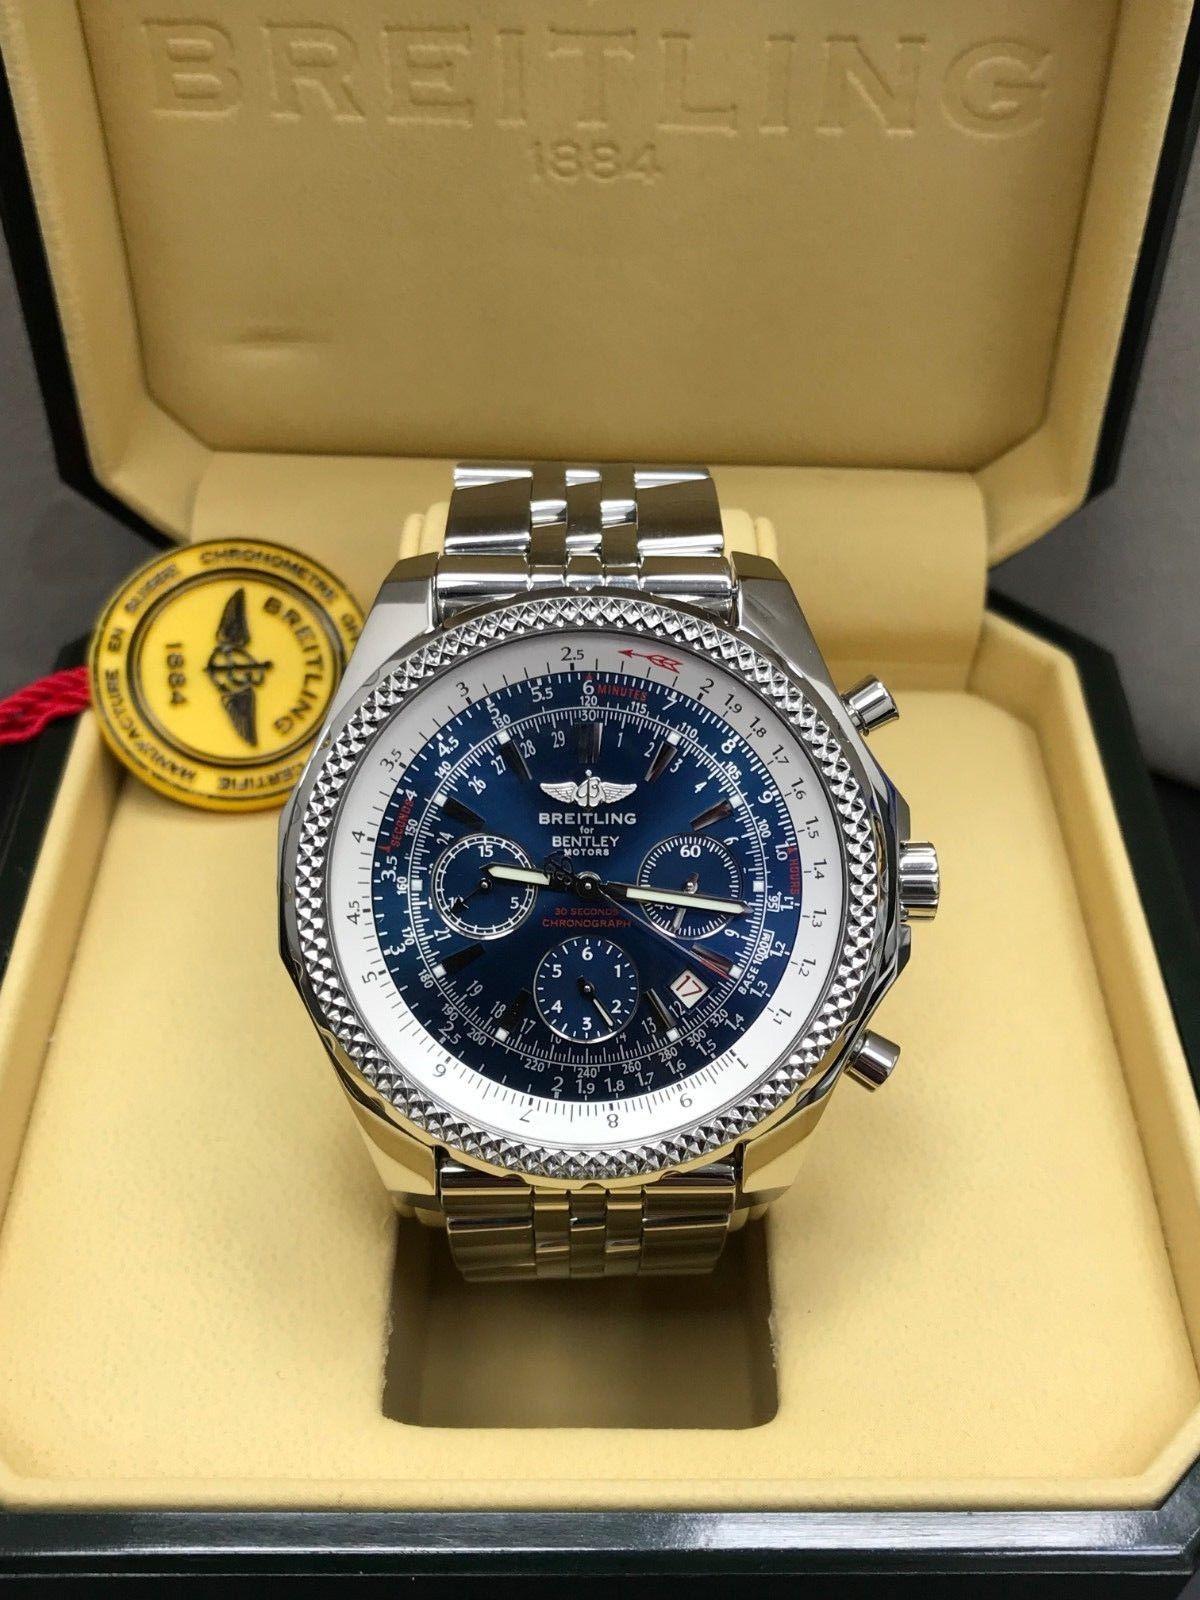 bentley motors special edition certified chronometer 100m 330ft by breitling a25362